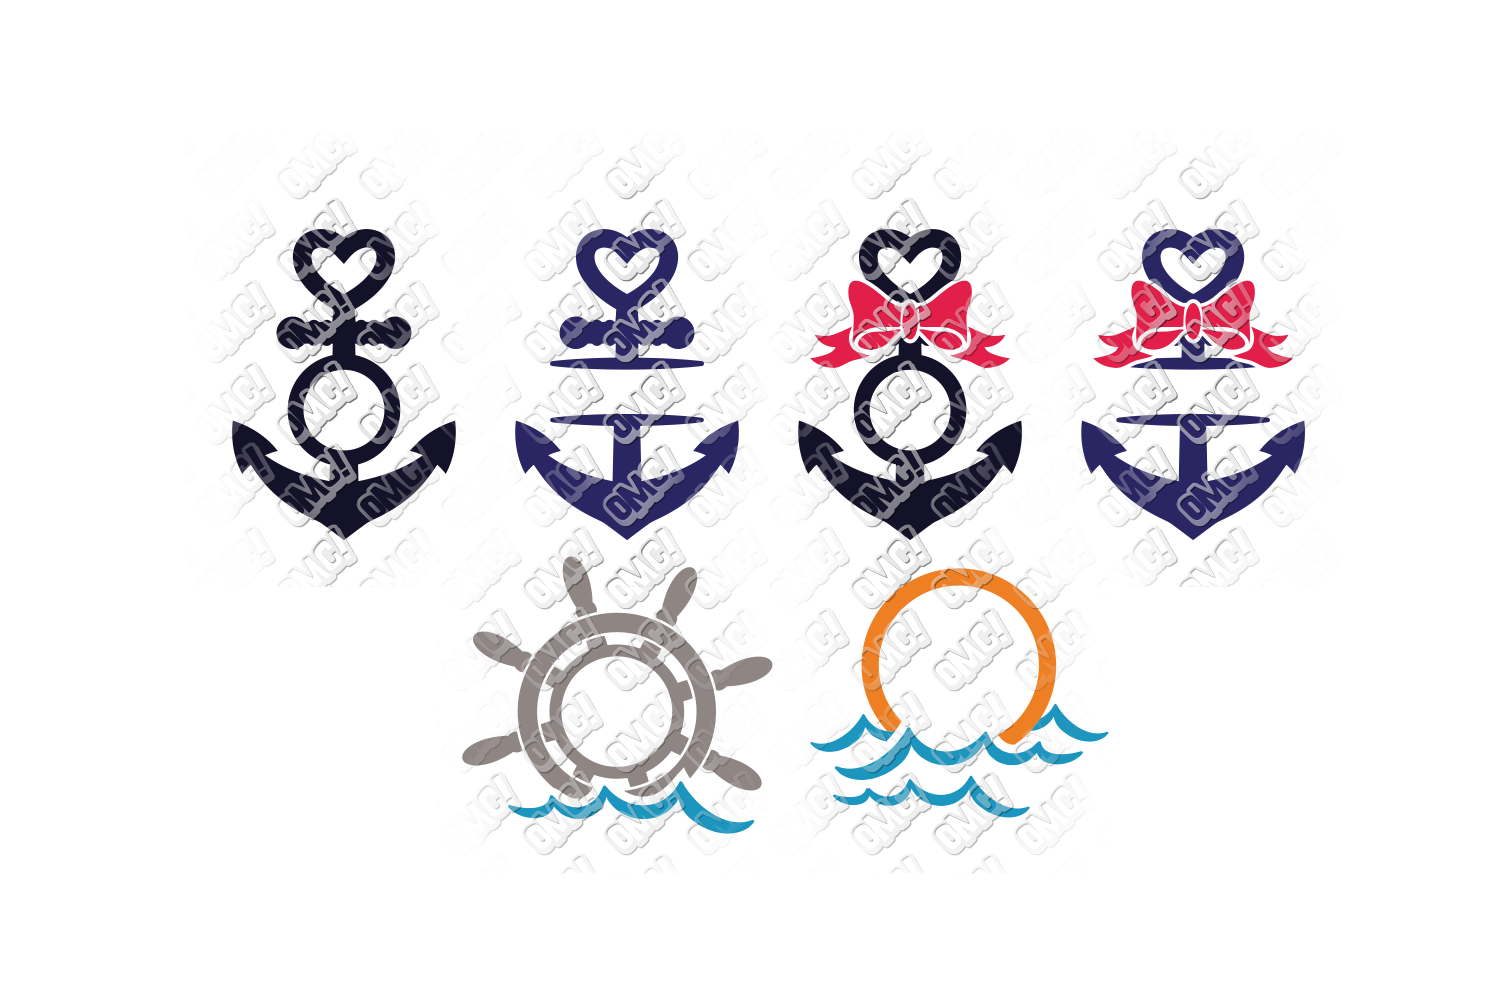 Cruise SVG Bundle Ship in SVG/DXF/PNG/JPEG/EPS (105530) | Cut Files